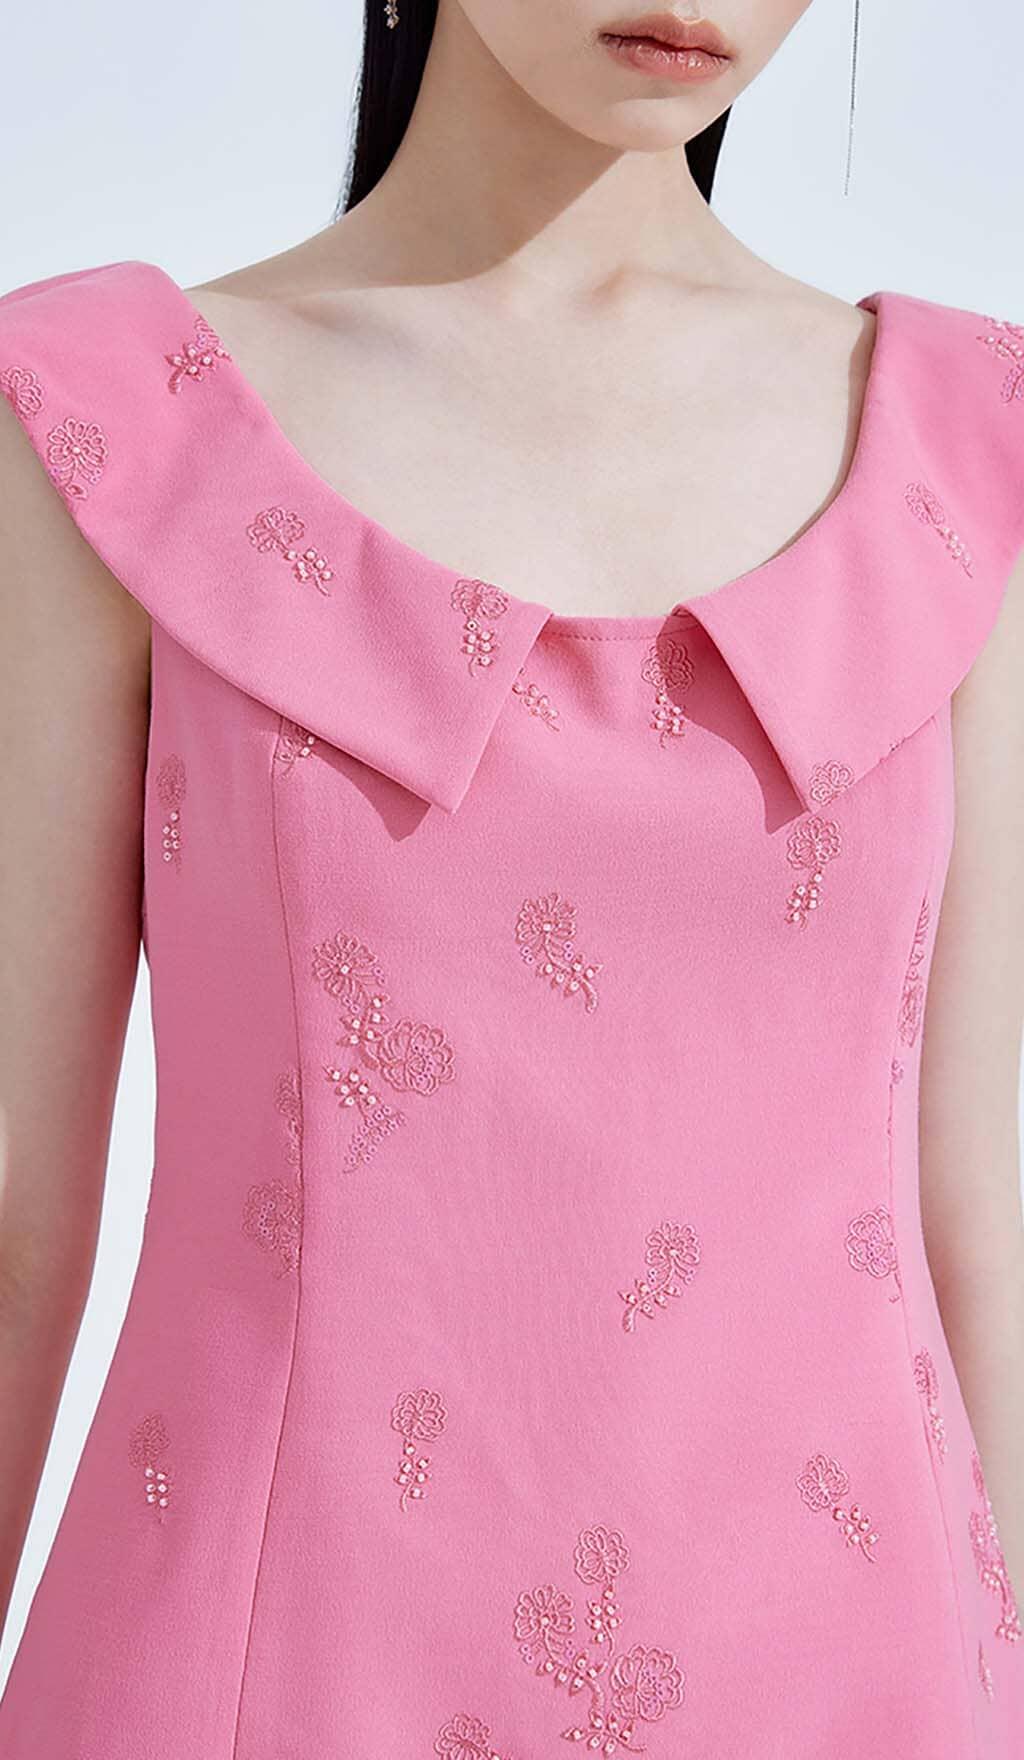 SLEEVELESS EMBROIDERED MINI DRESS IN PINK